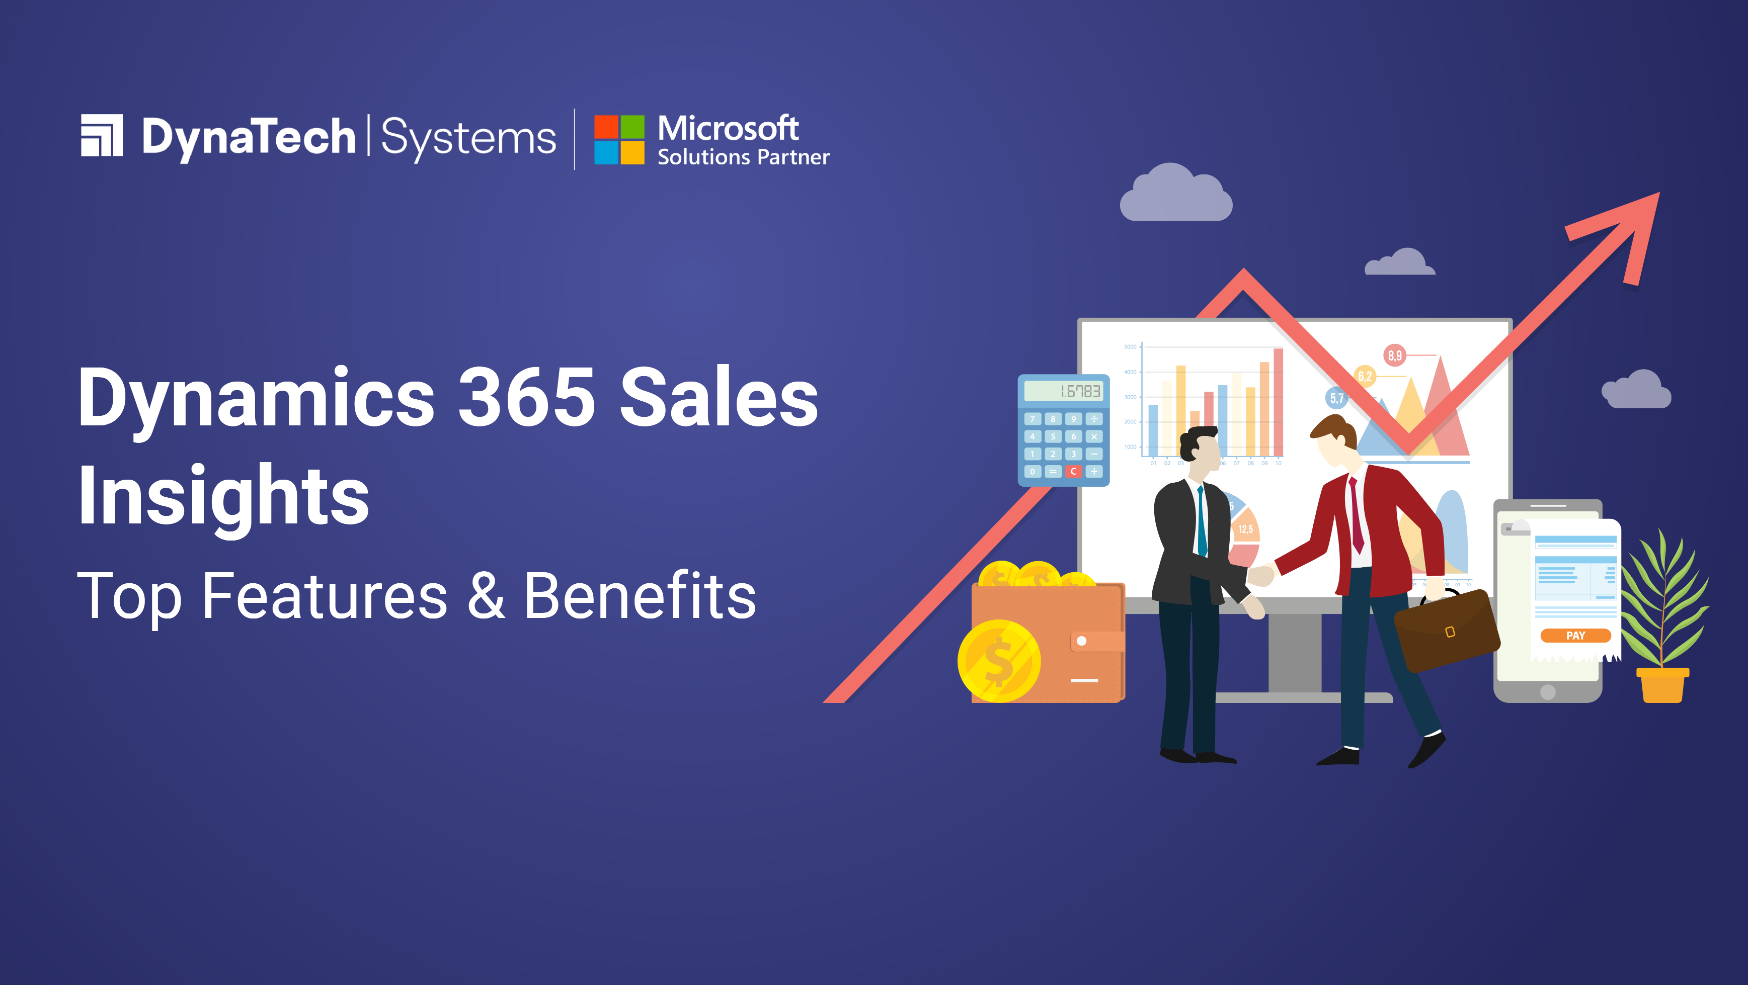 Dynamics 365 Sales Insights: Top Features & Benefits